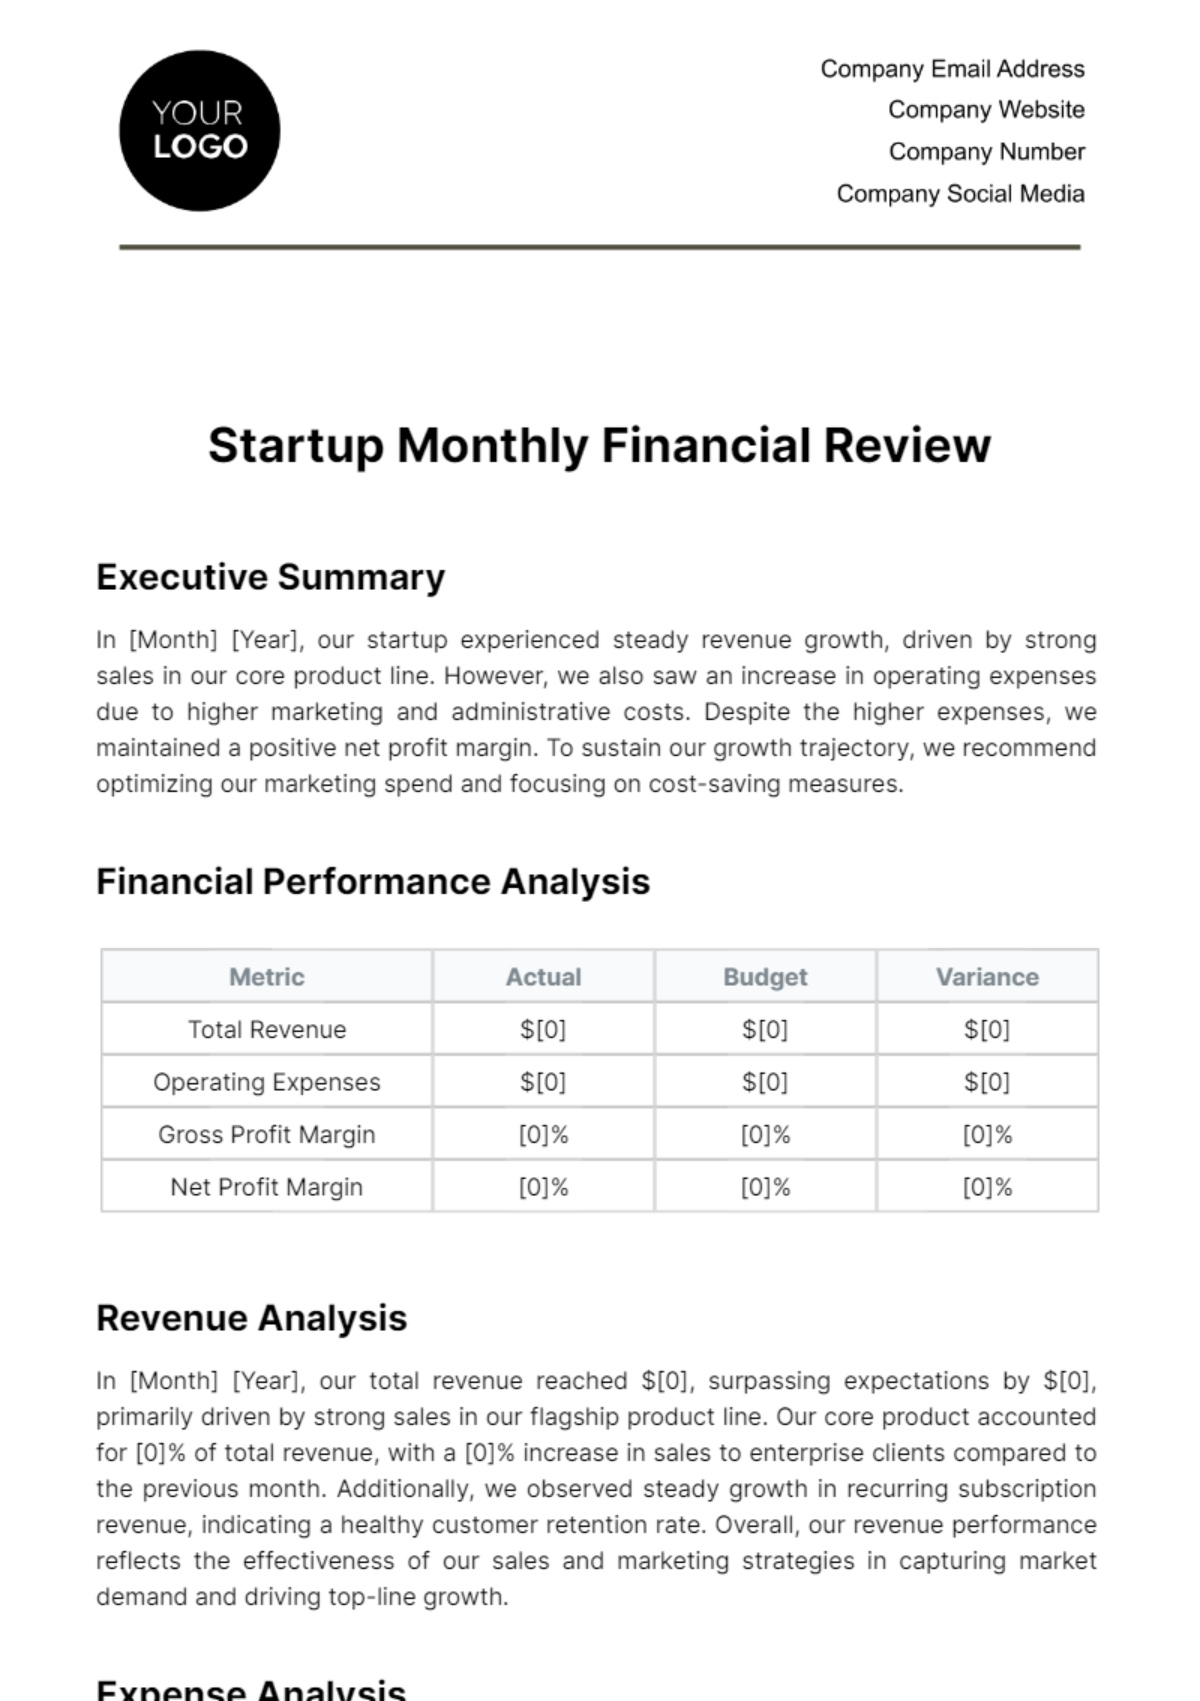 Free Startup Monthly Financial Review Template